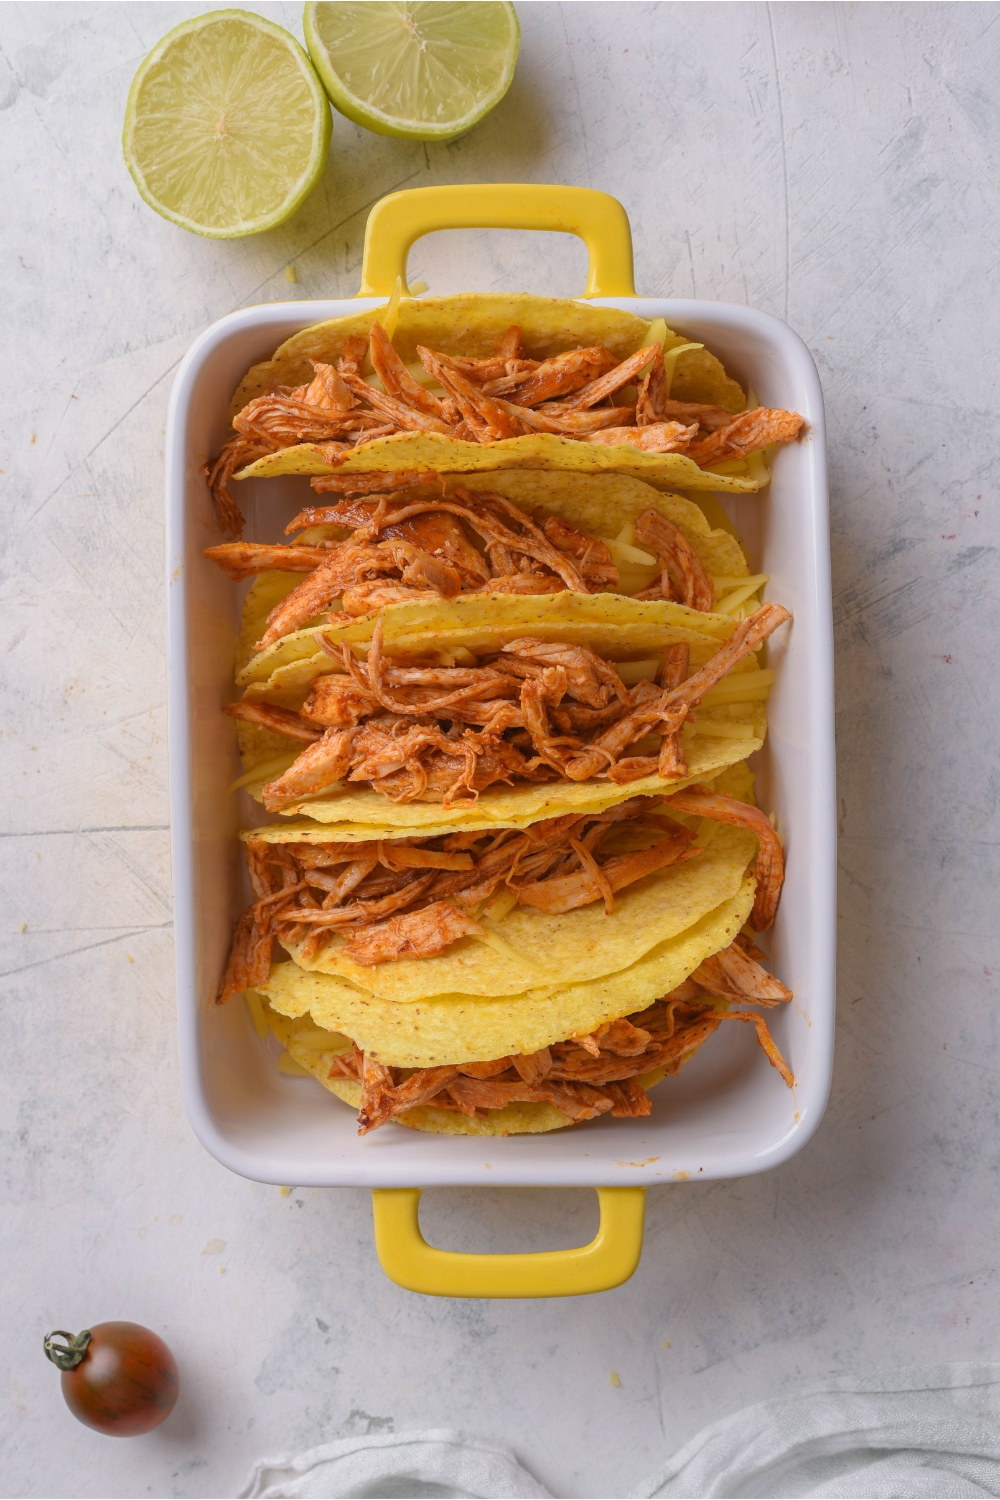 Five hard taco shells filled with seasoned shredded chicken in a baking dish.